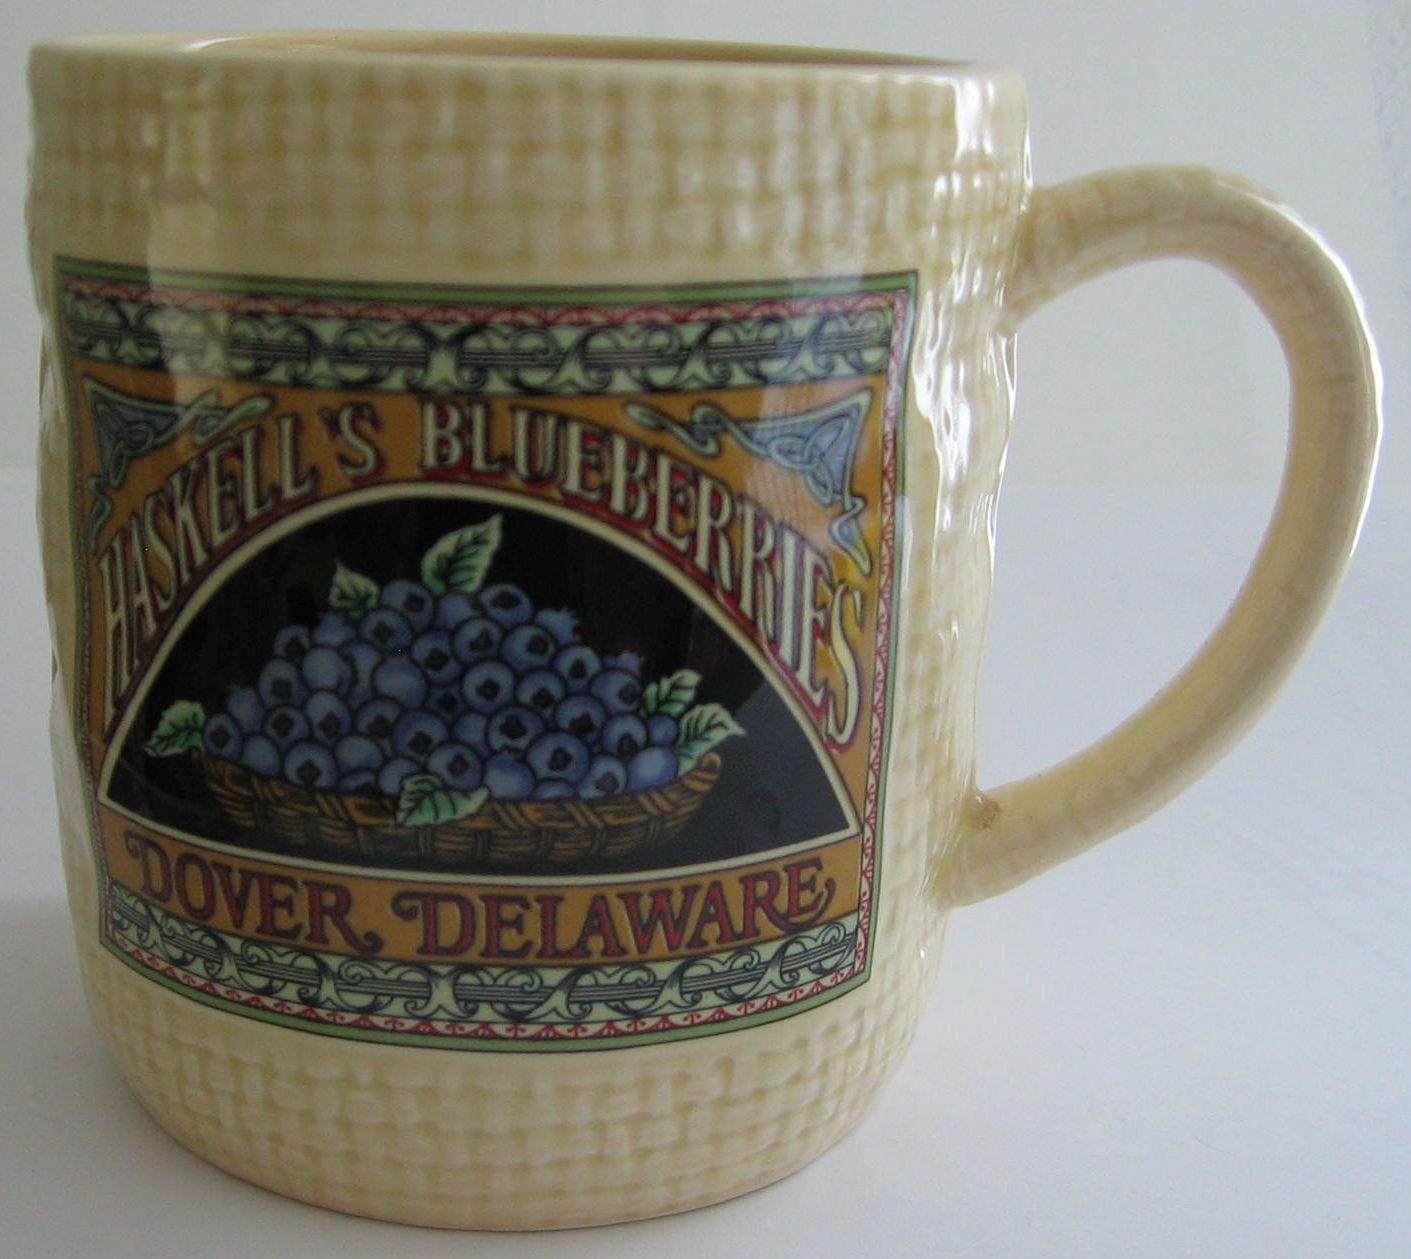 Haskell\'s Blueberries Coffee Cup Mug Dover DE Delaware 1988